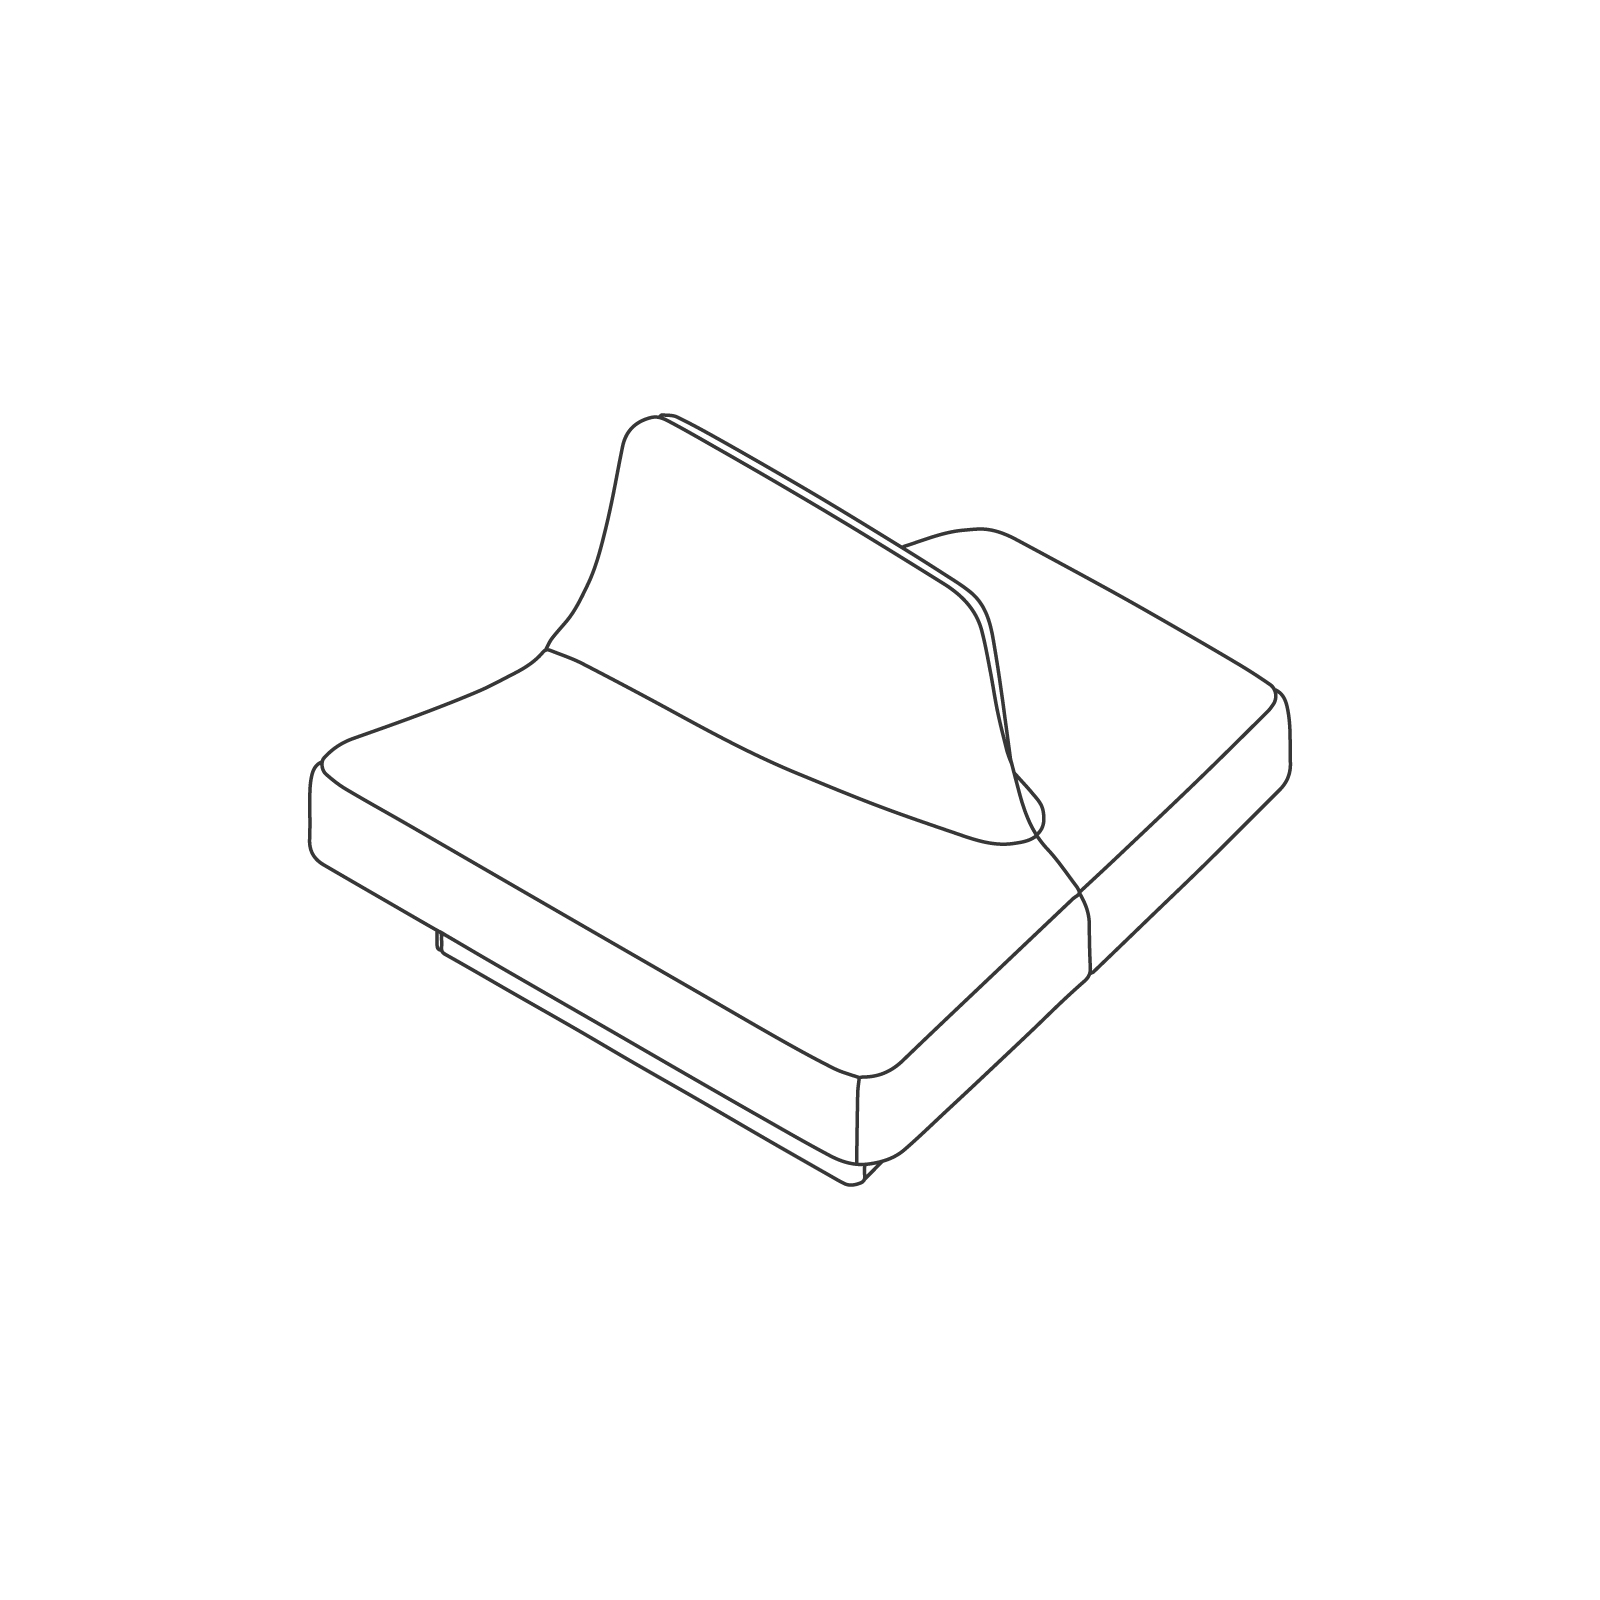 A line drawing - Rhyme Low Modular Seating–End A